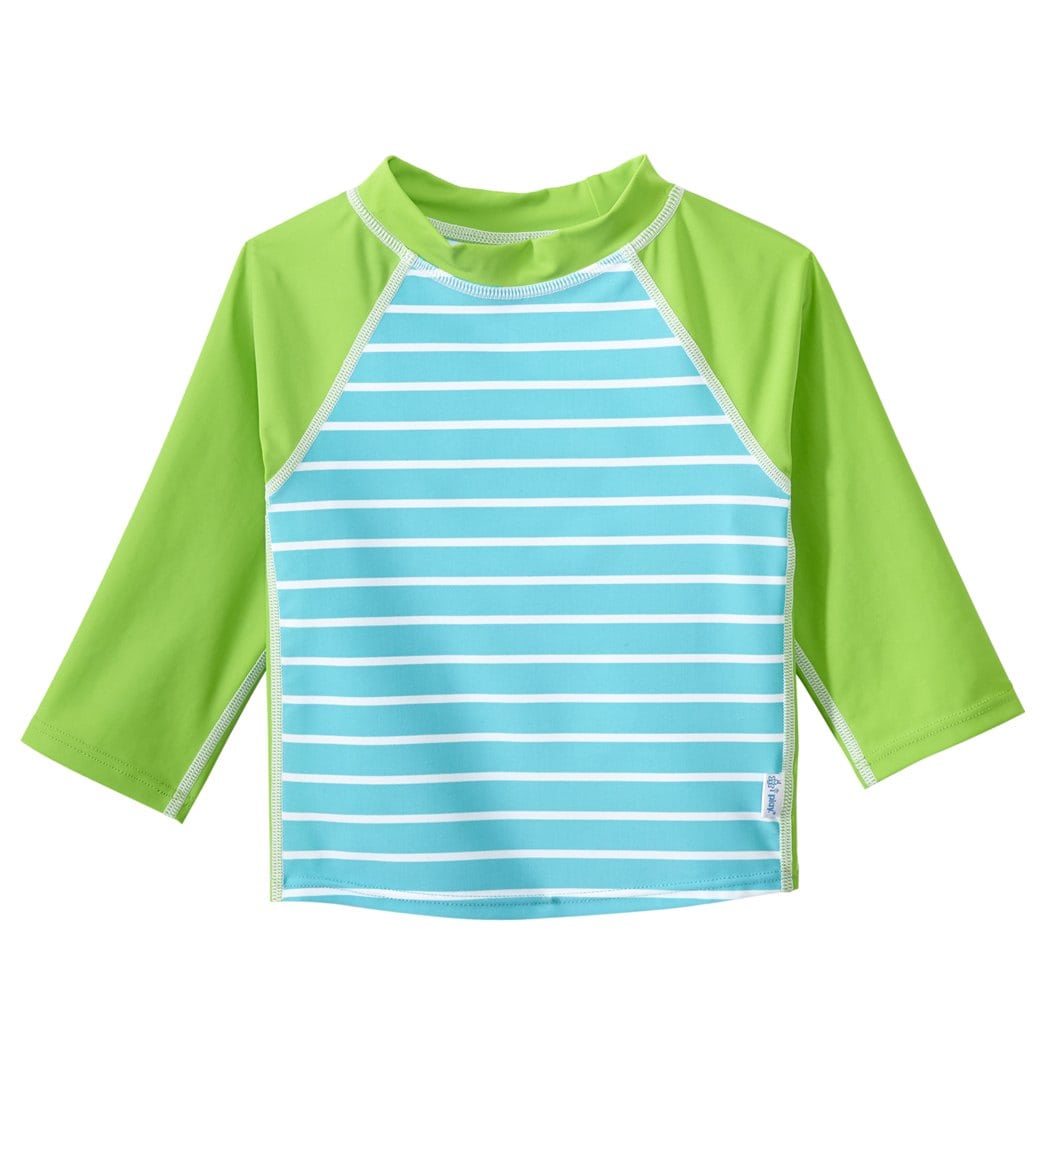 I Play. By Green Sprouts Boys' Classic 3/4 Sleeve Rashguard Baby - Aqua Stripe 6 Months - Swimoutlet.com